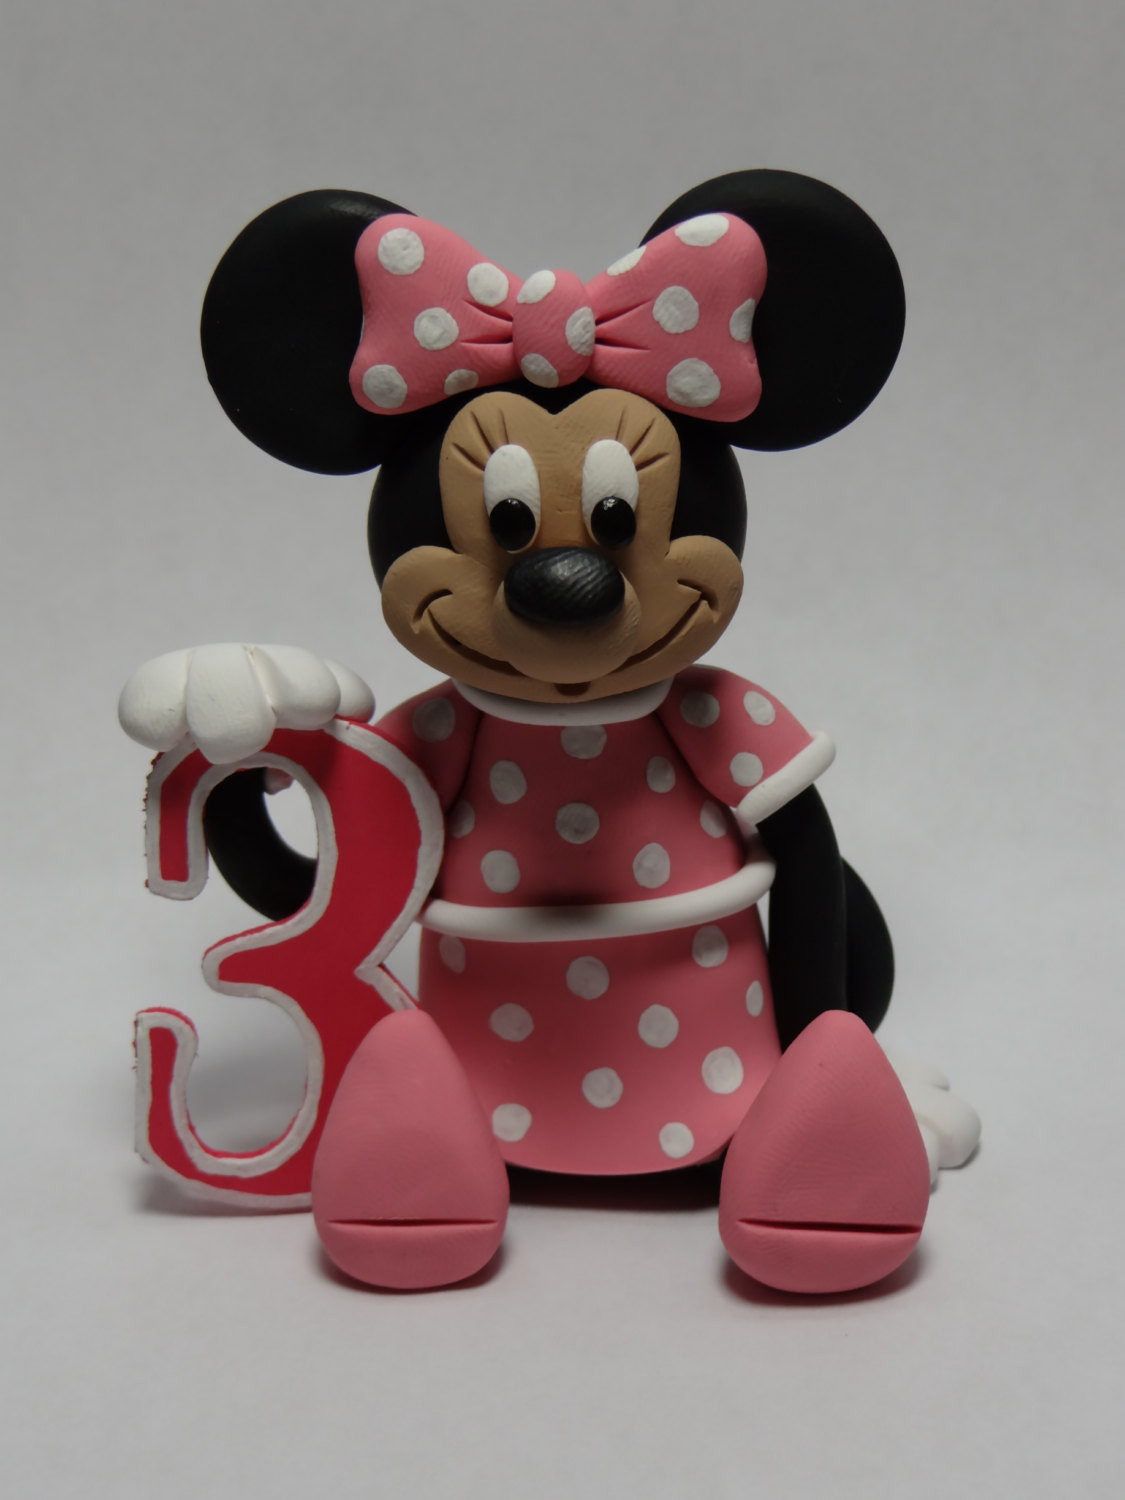 Minnie Mouse Birthday Cake Topper
 Minnie Mouse Birthday Cake Topper by ClayCreationsbyLaura